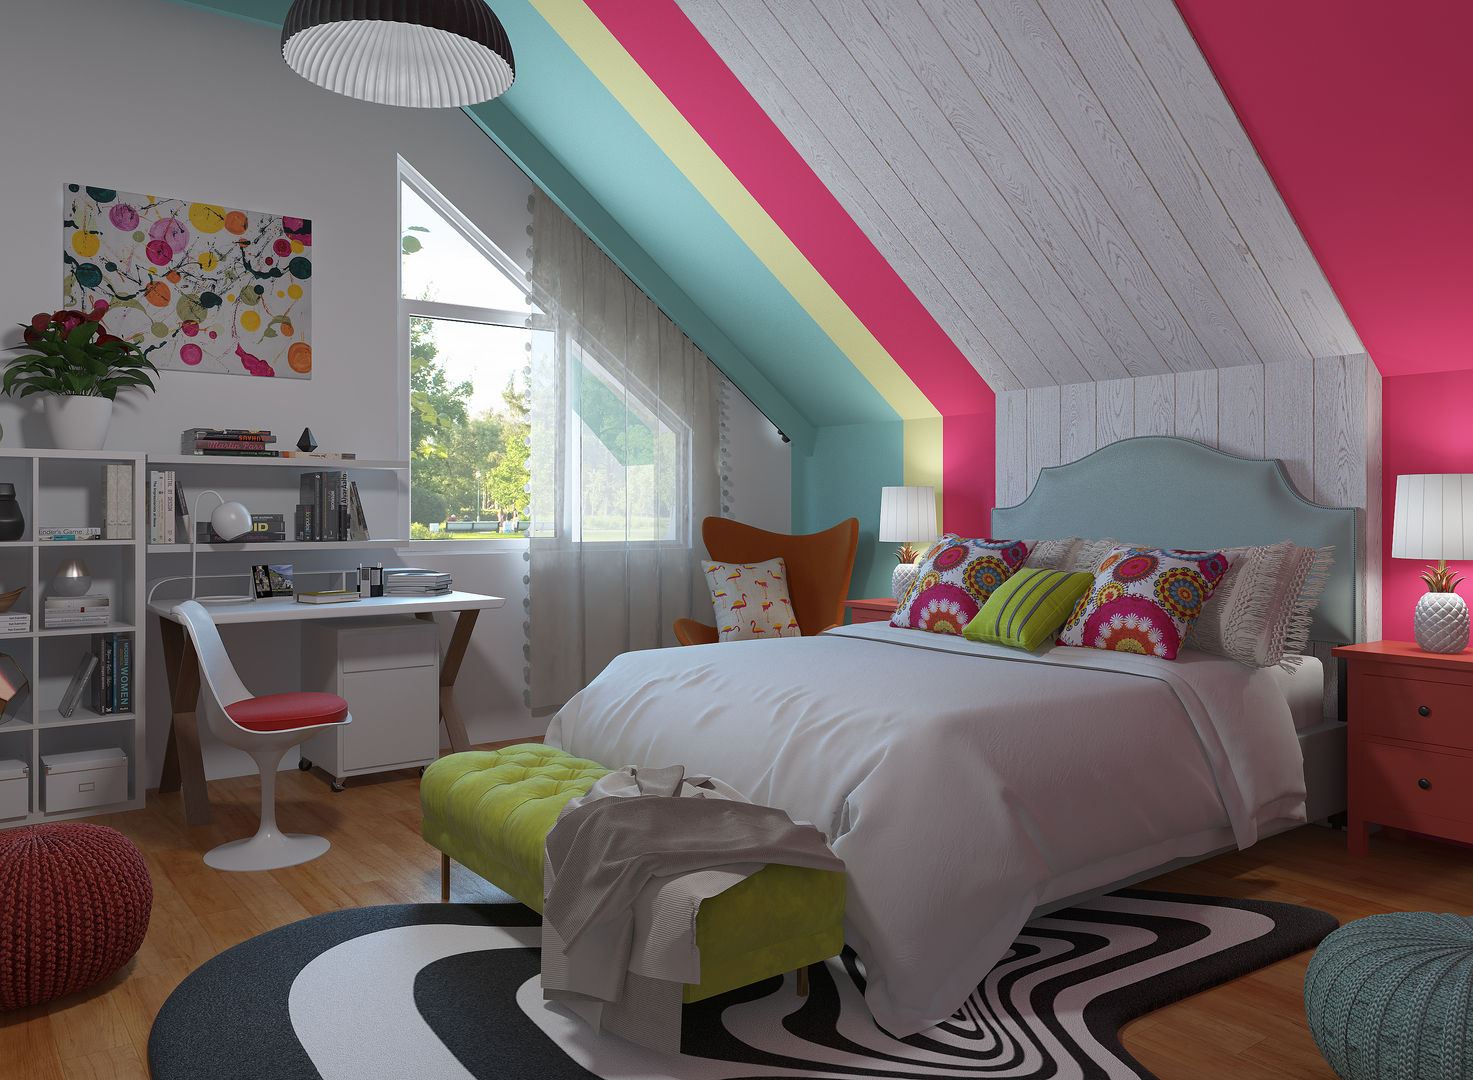 Eclectic -Pop Art decoration homify Phòng ngủ phong cách chiết trung bedroom,decorate bedroom,how to decorate,pop art style,pop art bedroom,3d design,interior design,rendering,home deco,colourful,customized designs